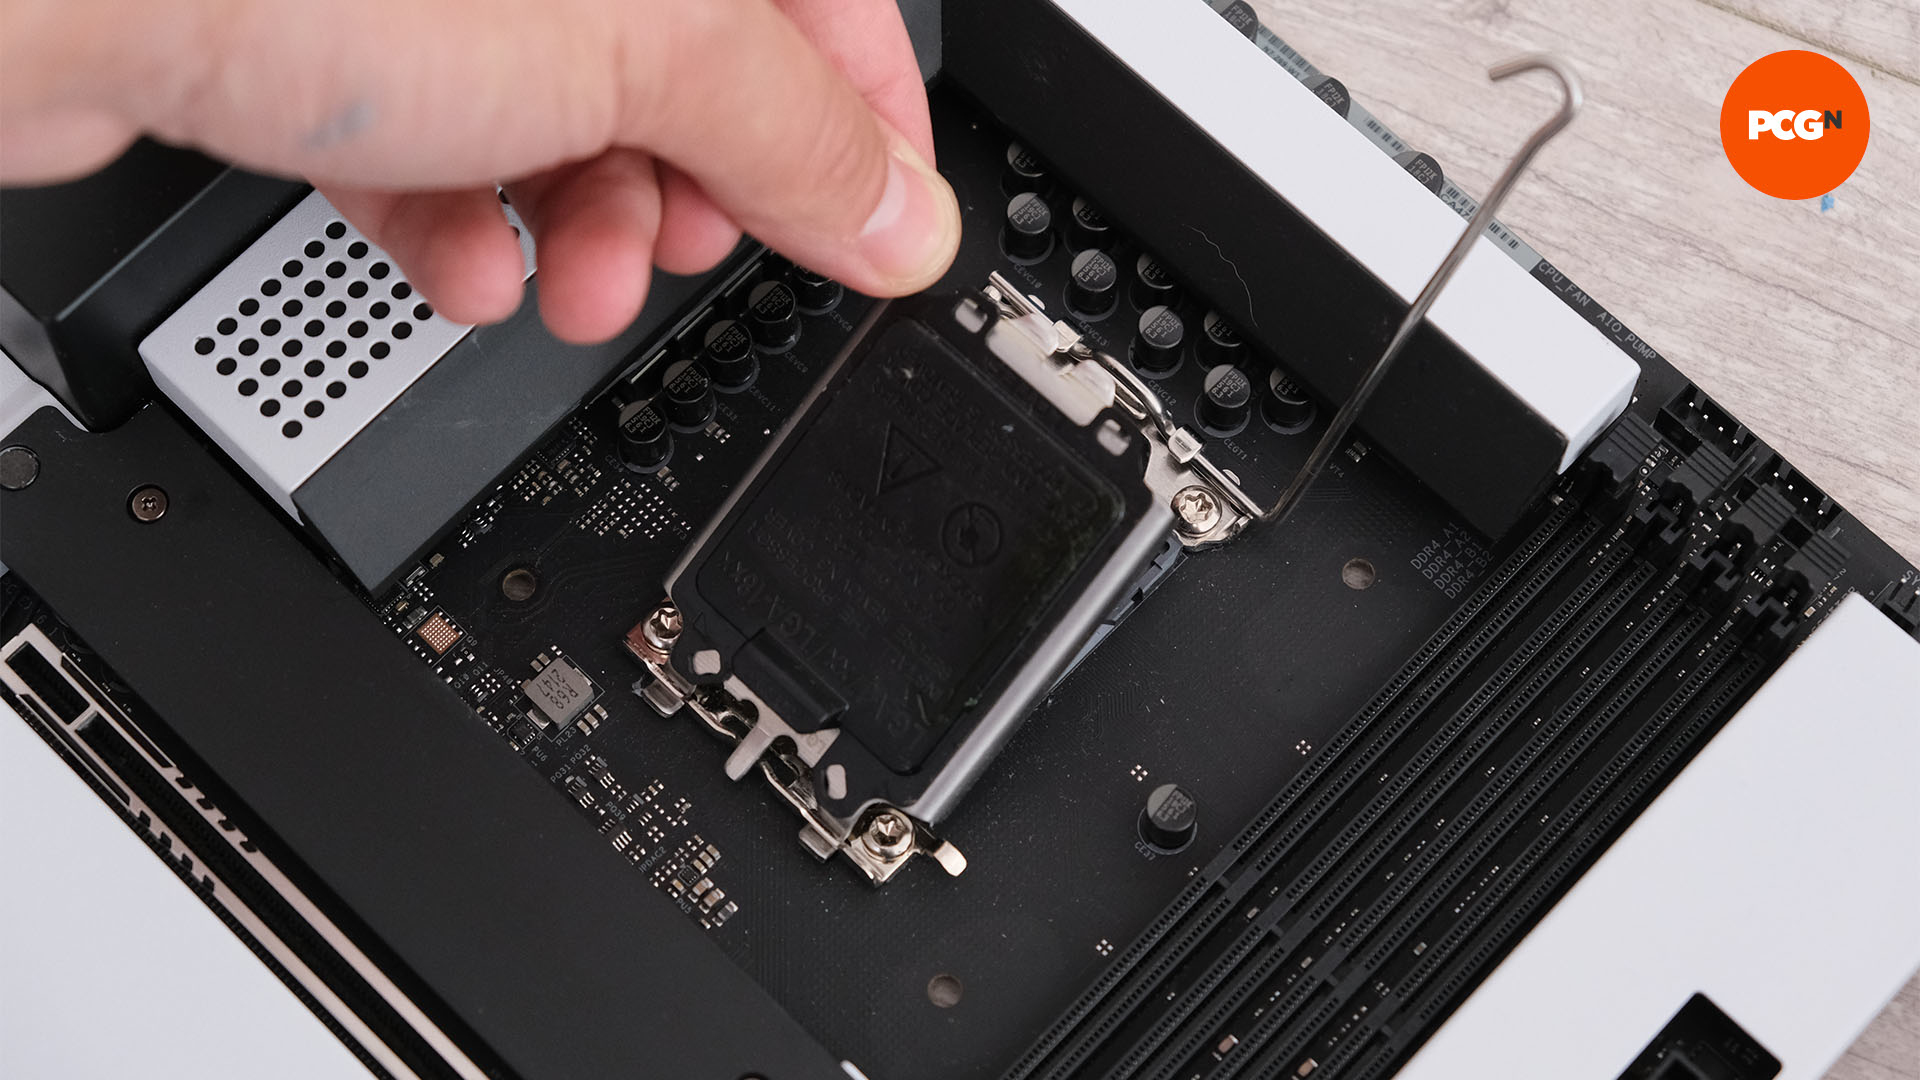 A hand pulls back the cover on the CPU port of the motherboard